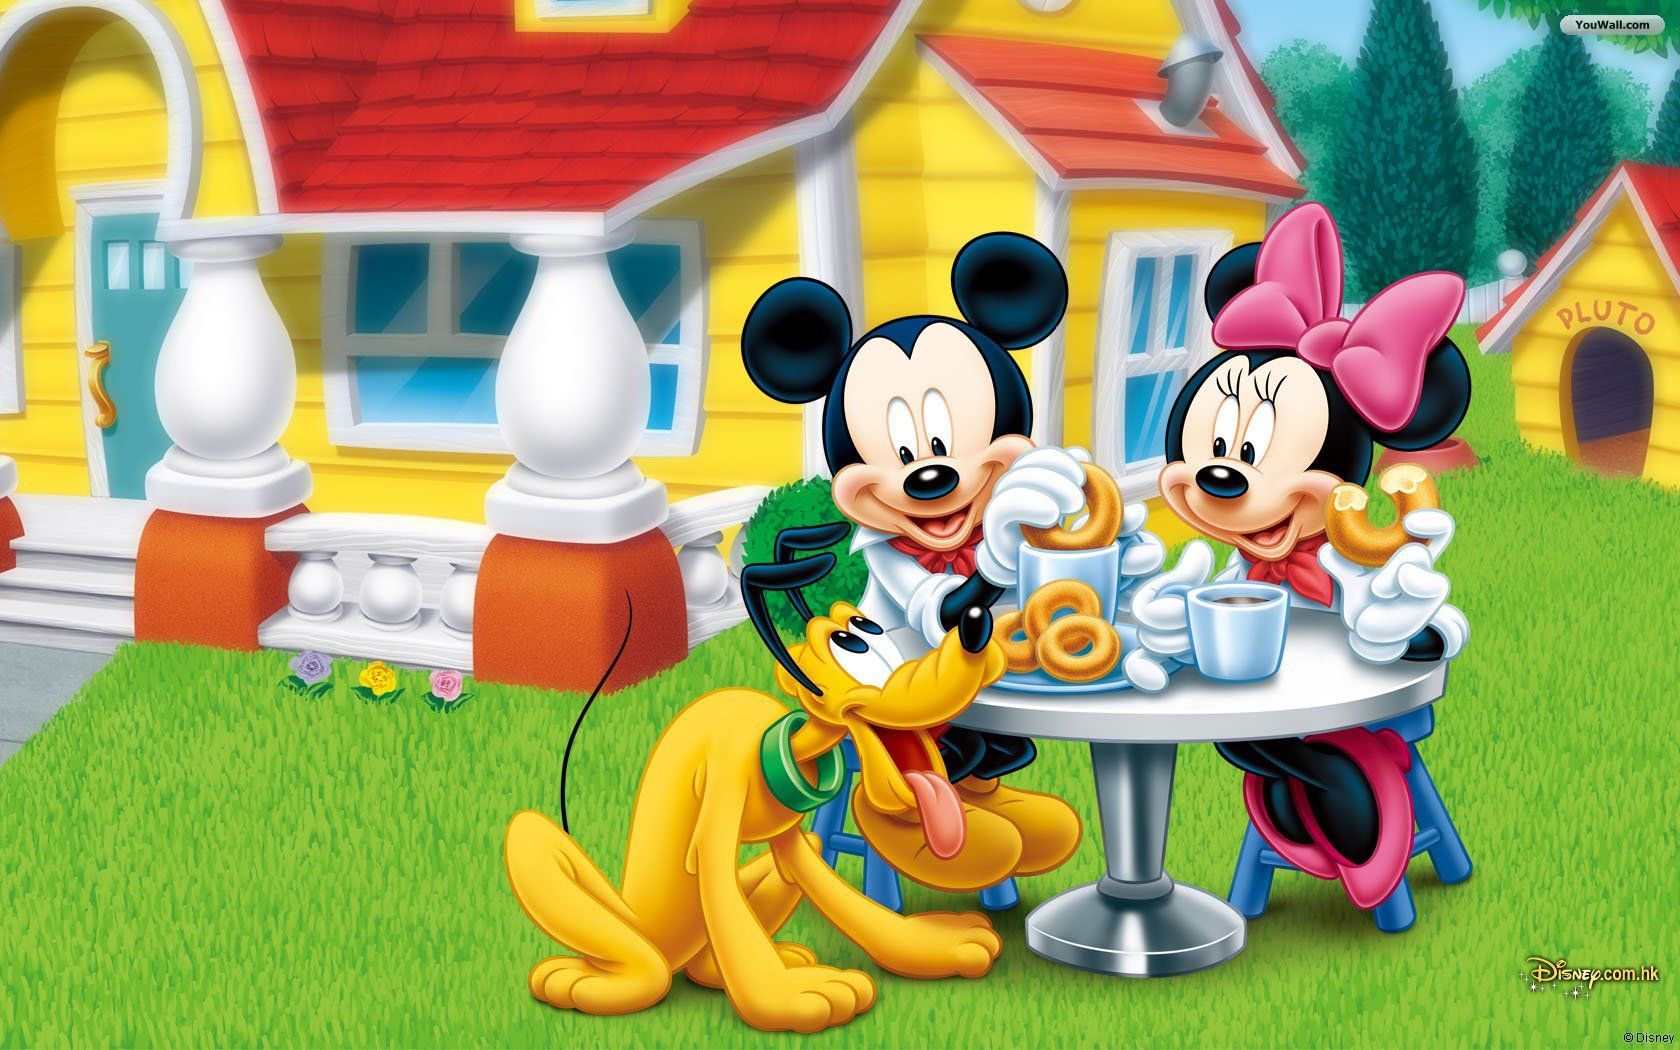 YouWall - Mickey Mouse Wallpaper - wallpaper,wallpapers,free